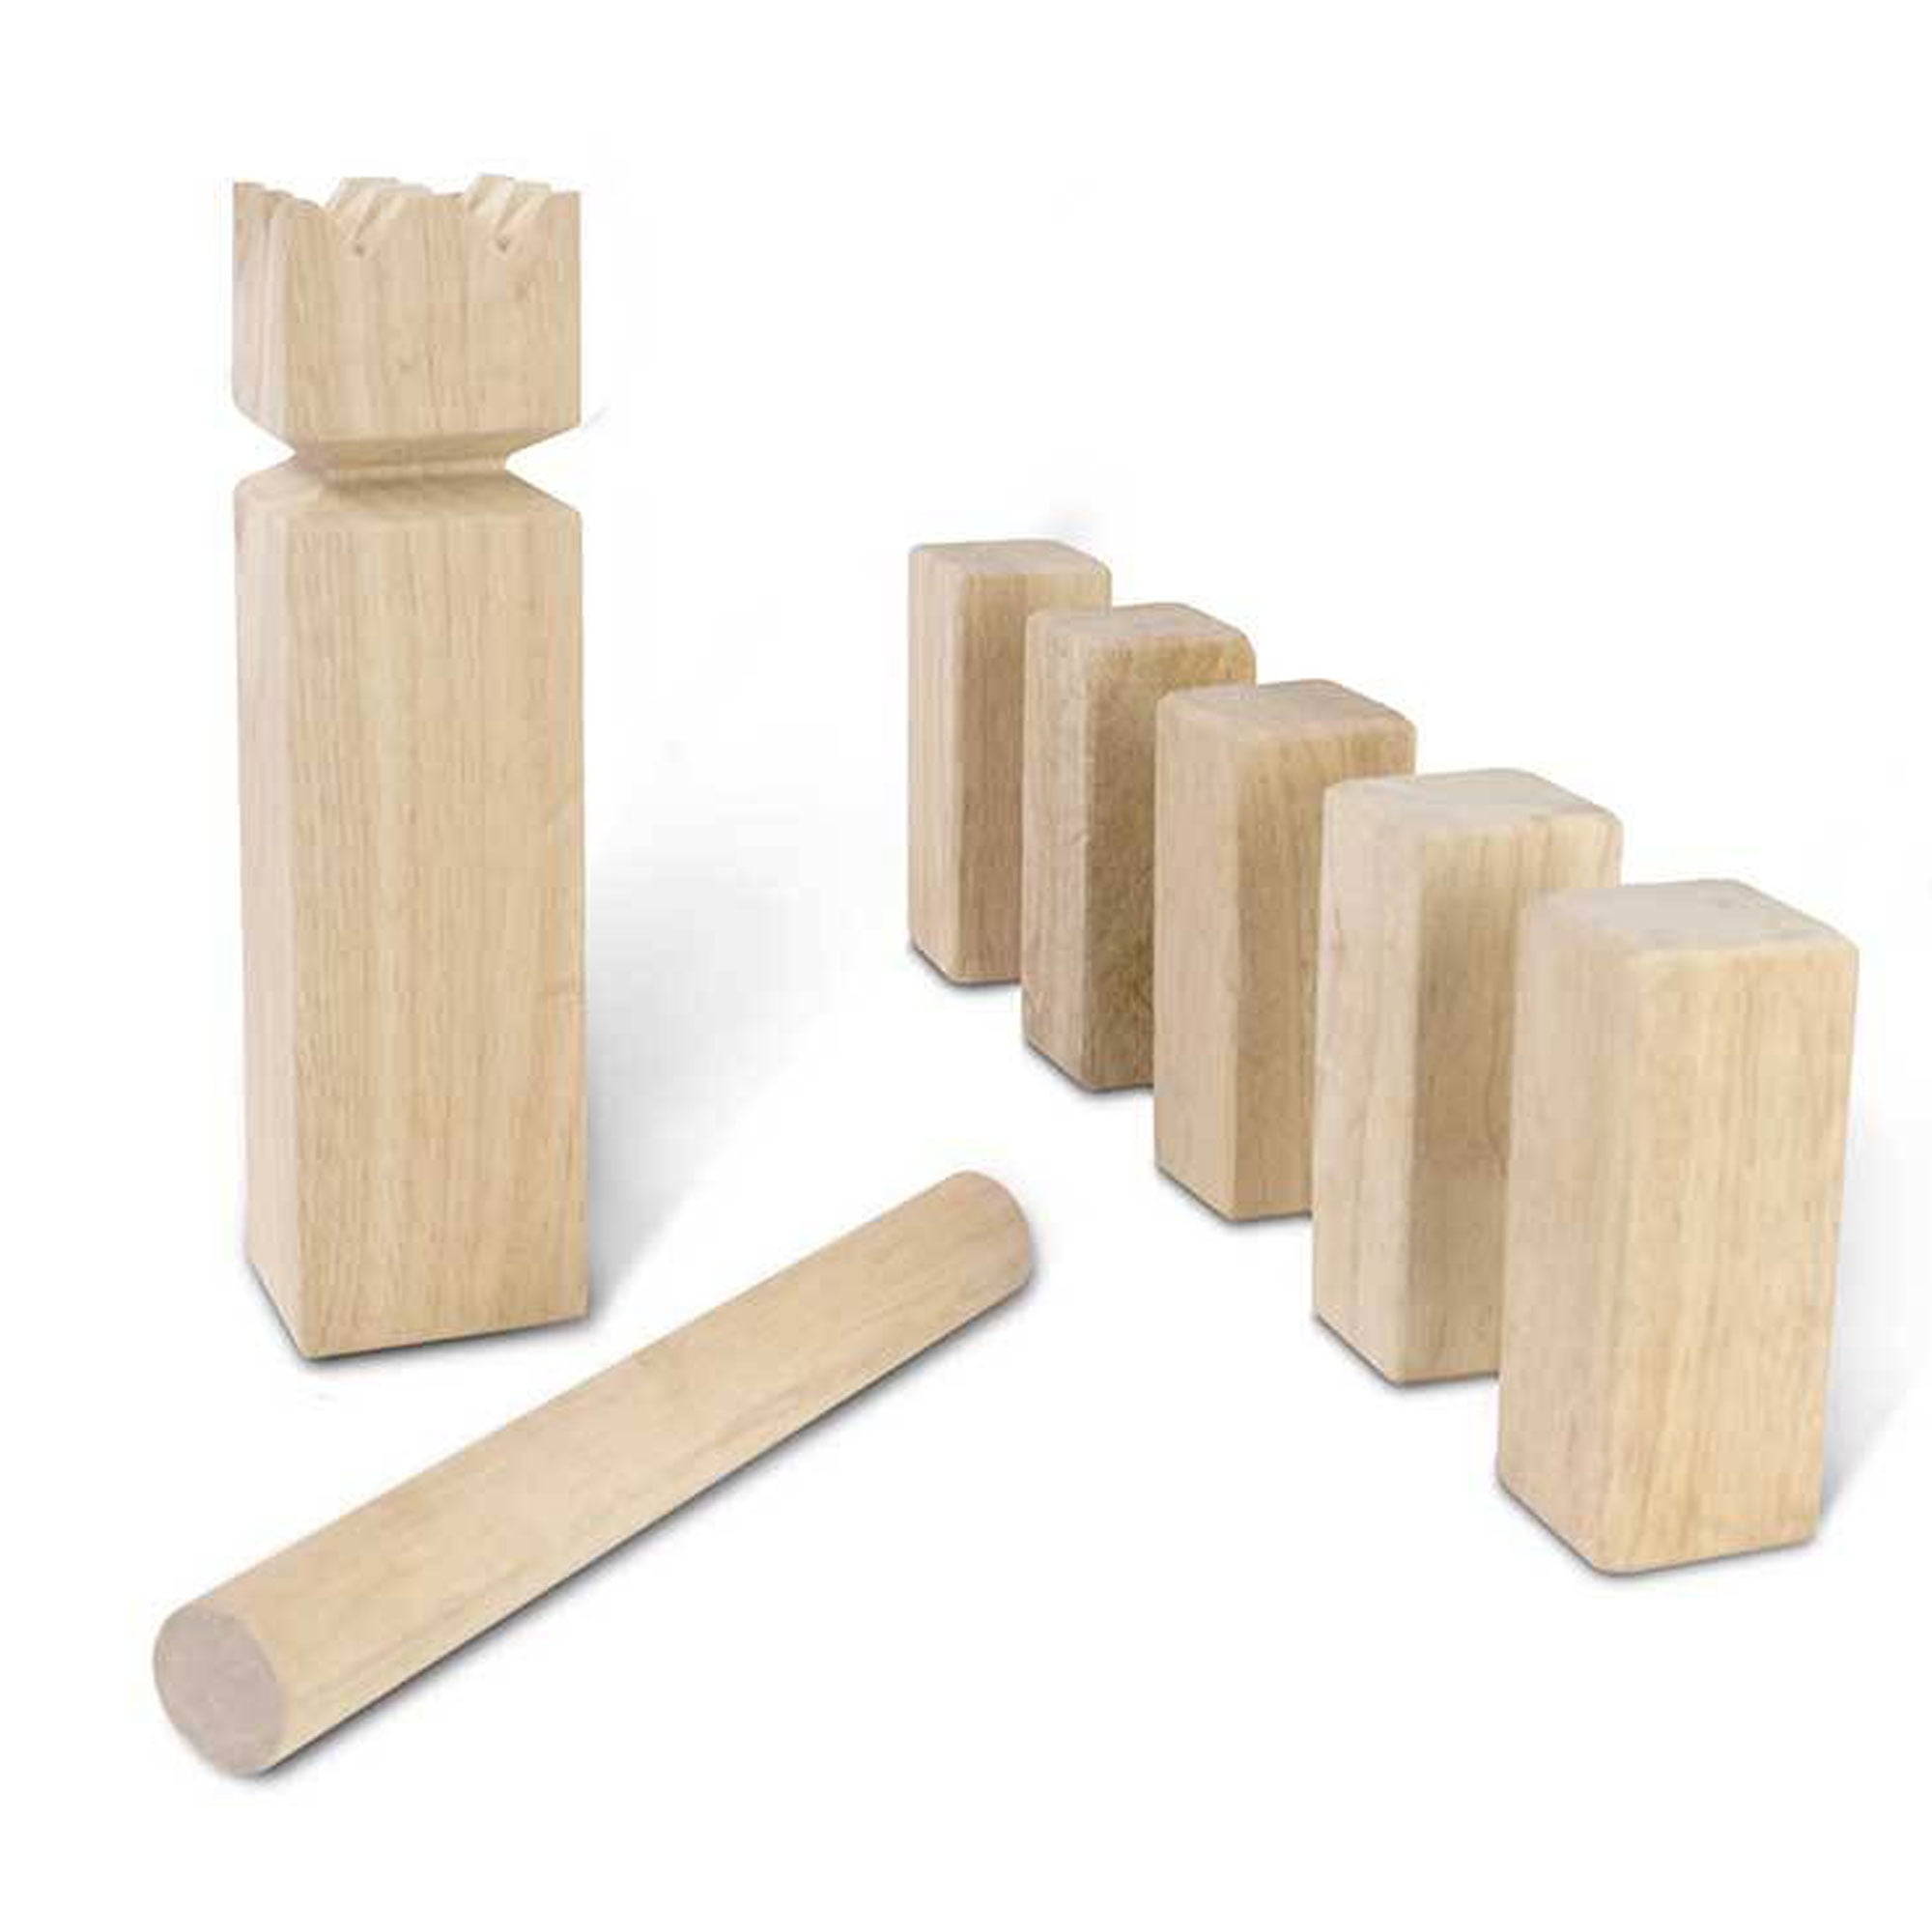 Toy Time Kubb Viking Chess Game - Wood Outdoor Lawn Game Set, Combines  Bowling and Horseshoes, Strategic Party Fun for Adults, Families or Kids in  the Board Games department at